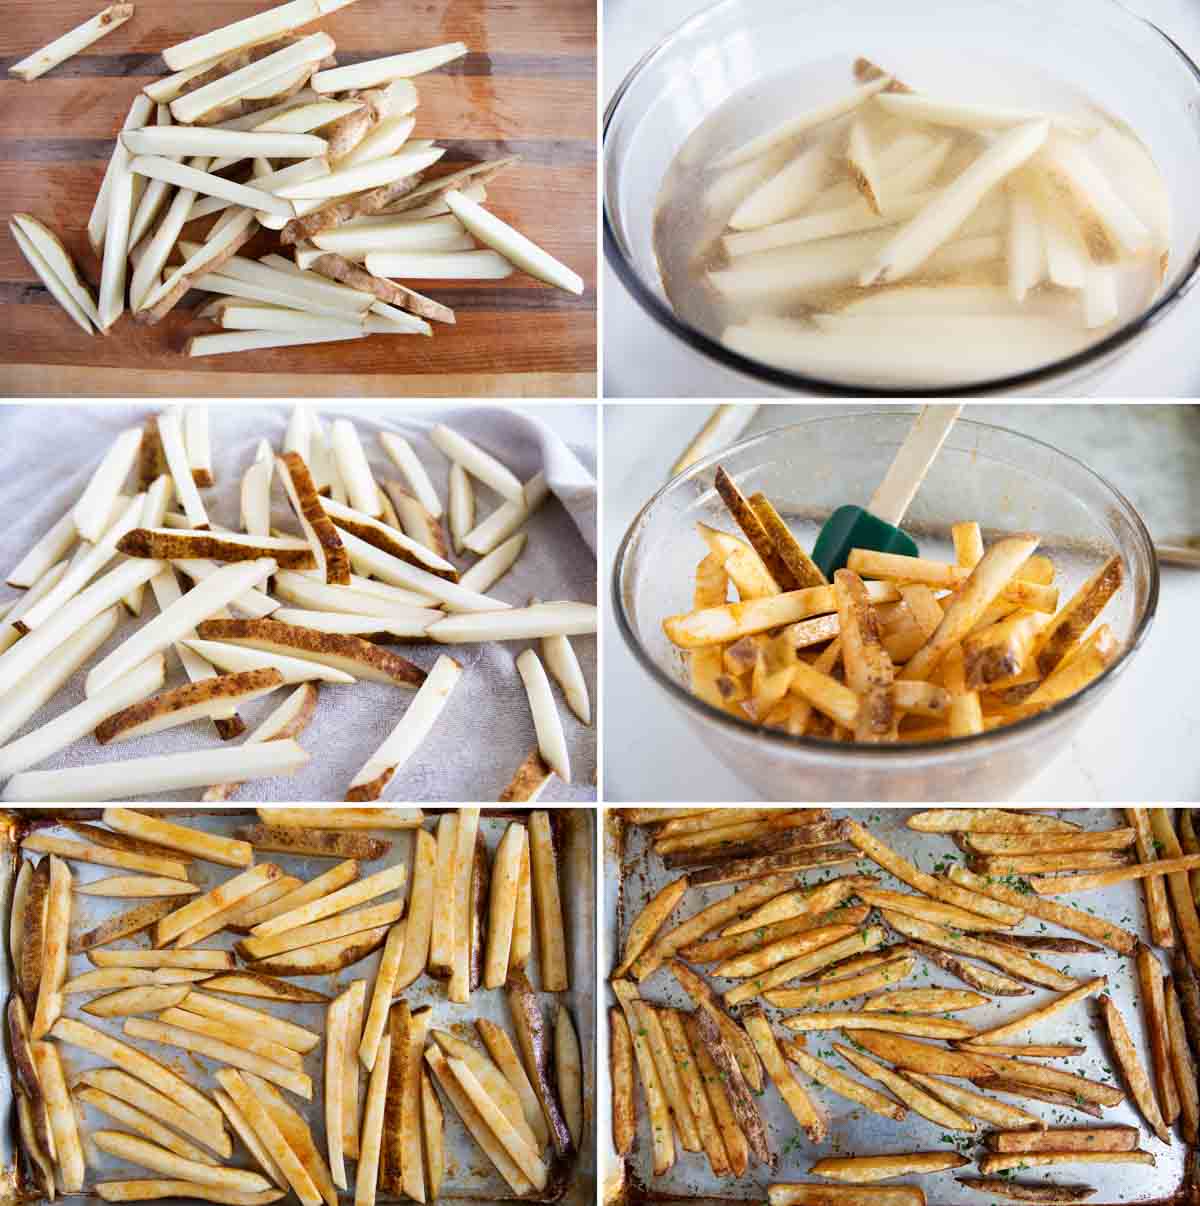 Steps to make baked French fries.